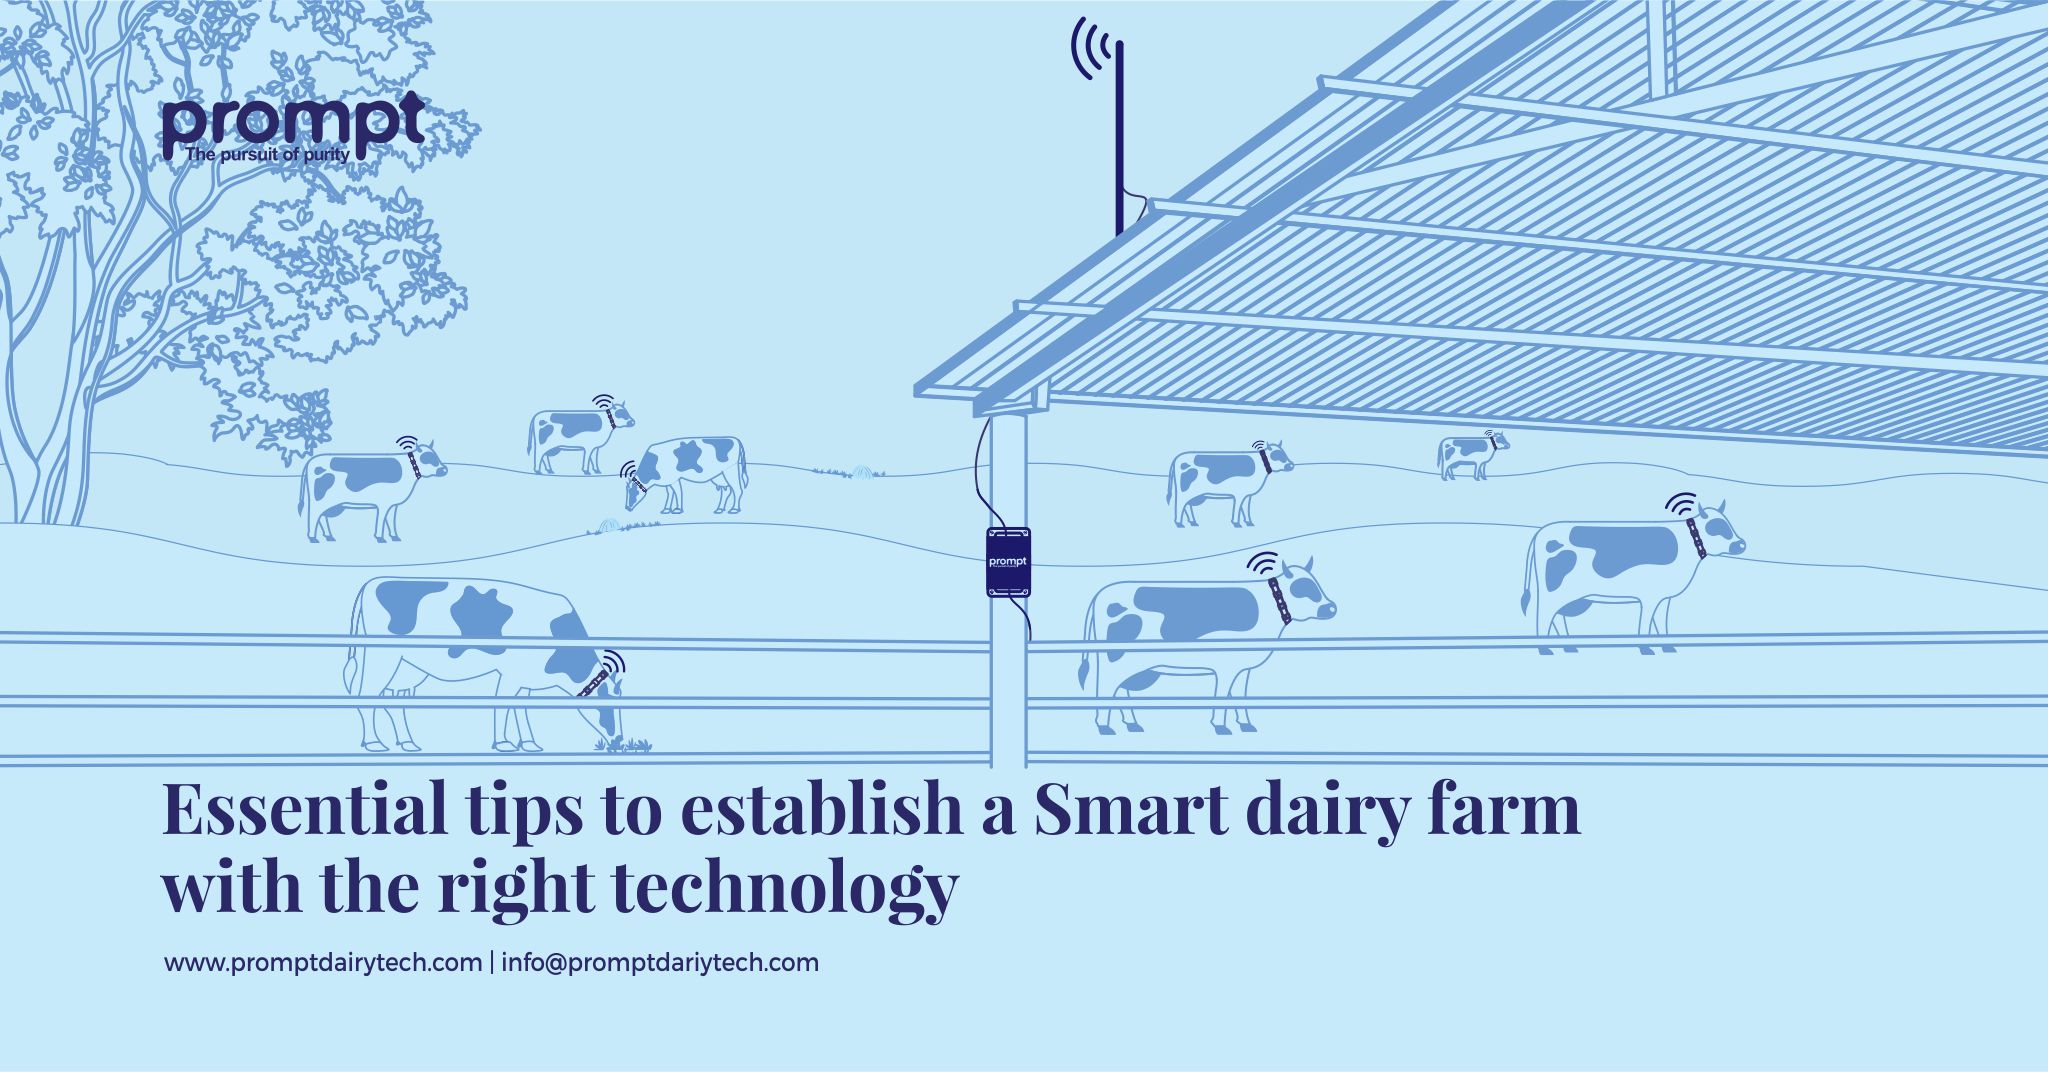 Seven essential tips to establish a dairy farm business with the right technology